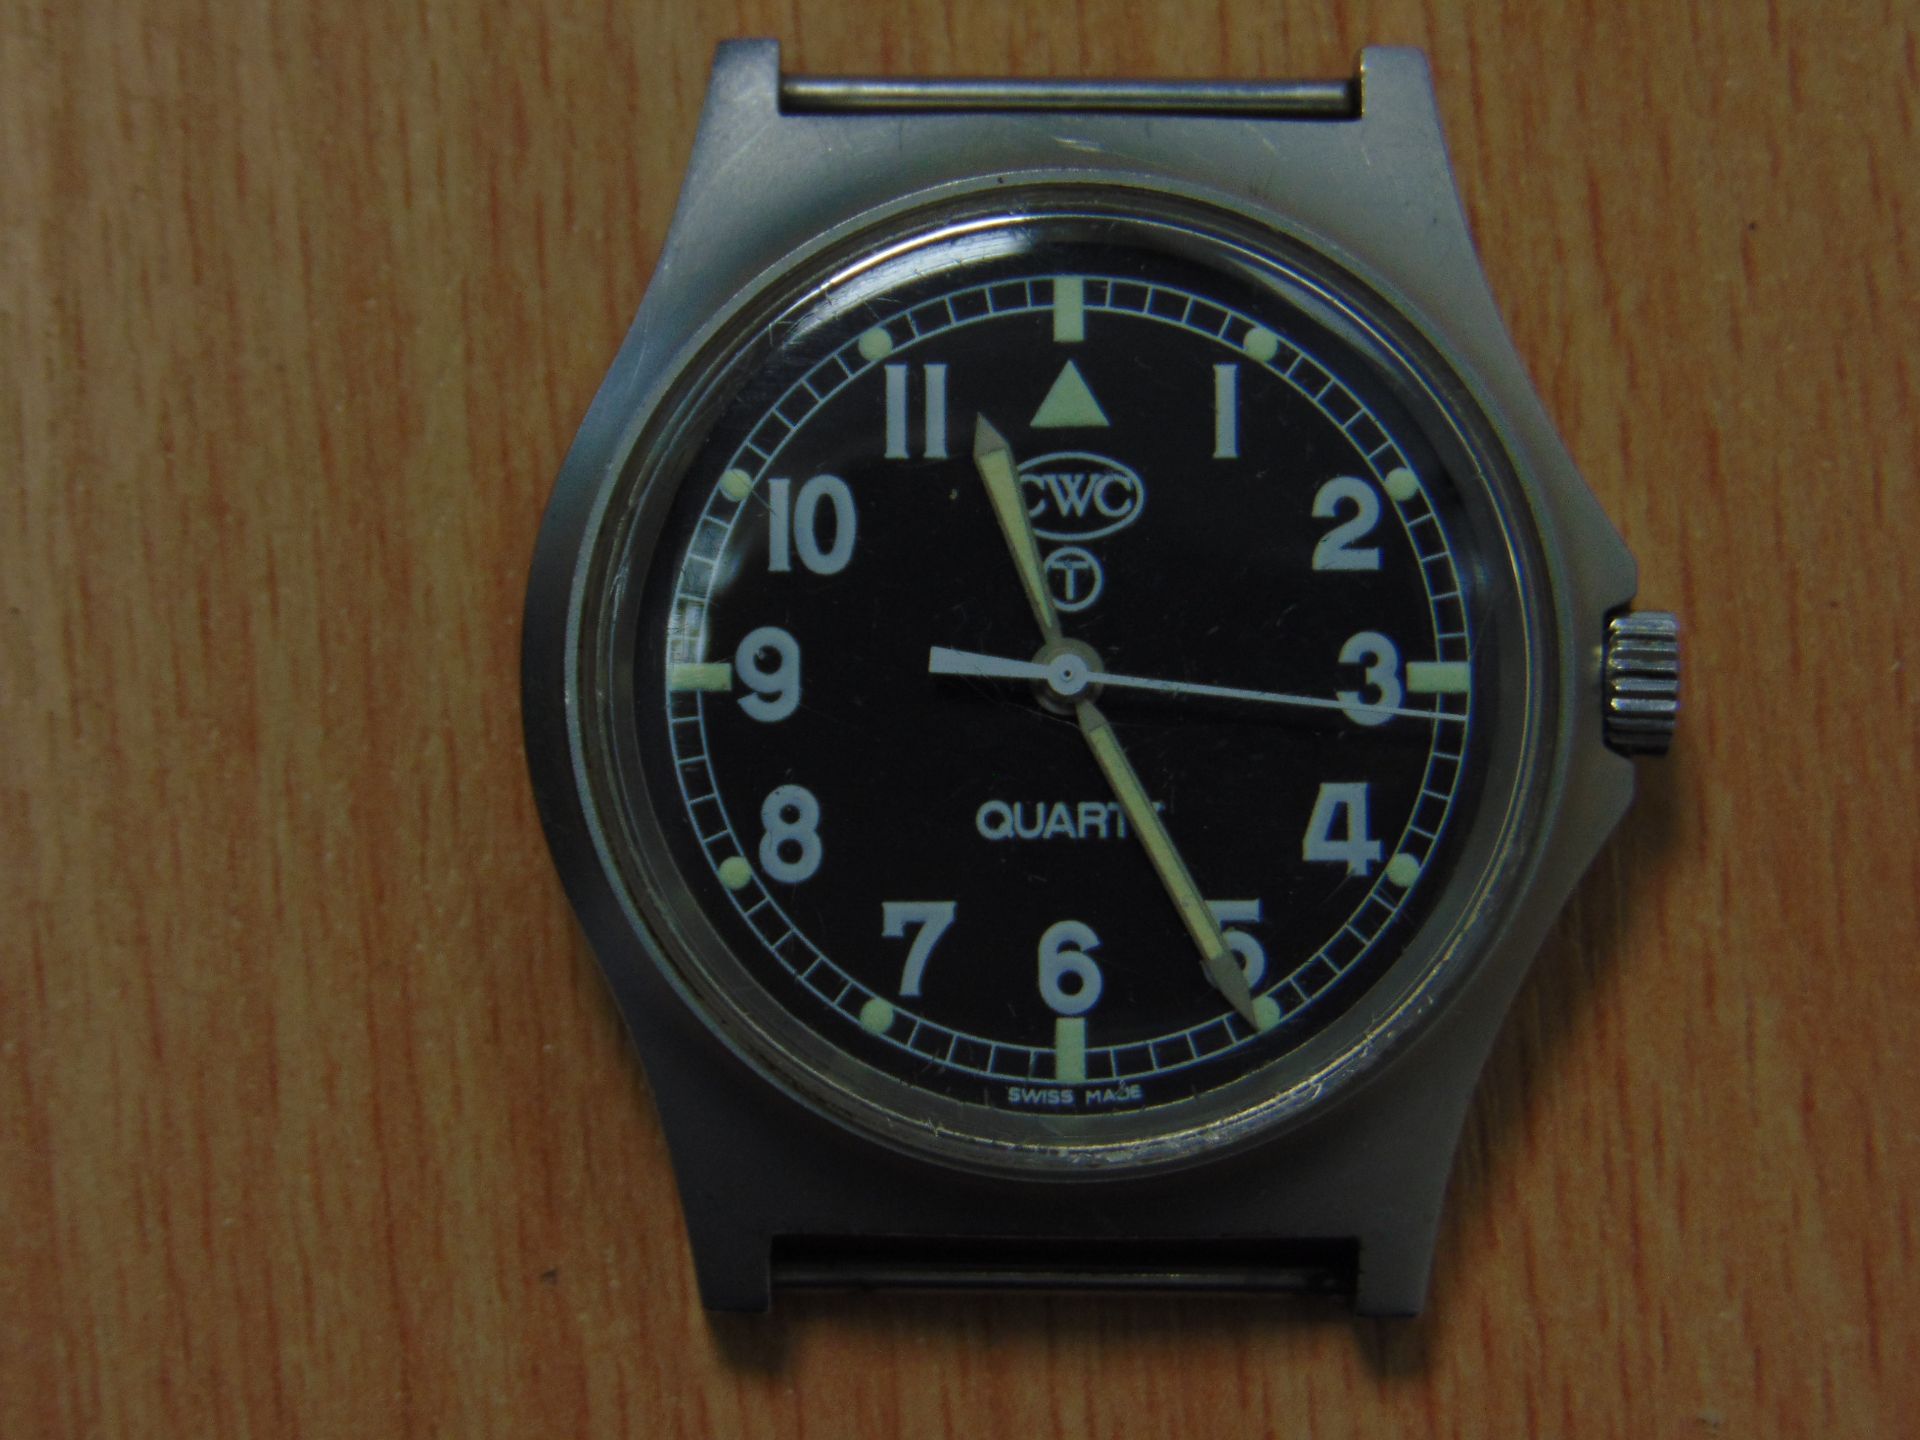 CWC "RARE" 0552 ROYAL MARINES/ ROYAL NAVY ISSUE SERVICE WATCH DATED 19889 GULF WAR - Image 4 of 8